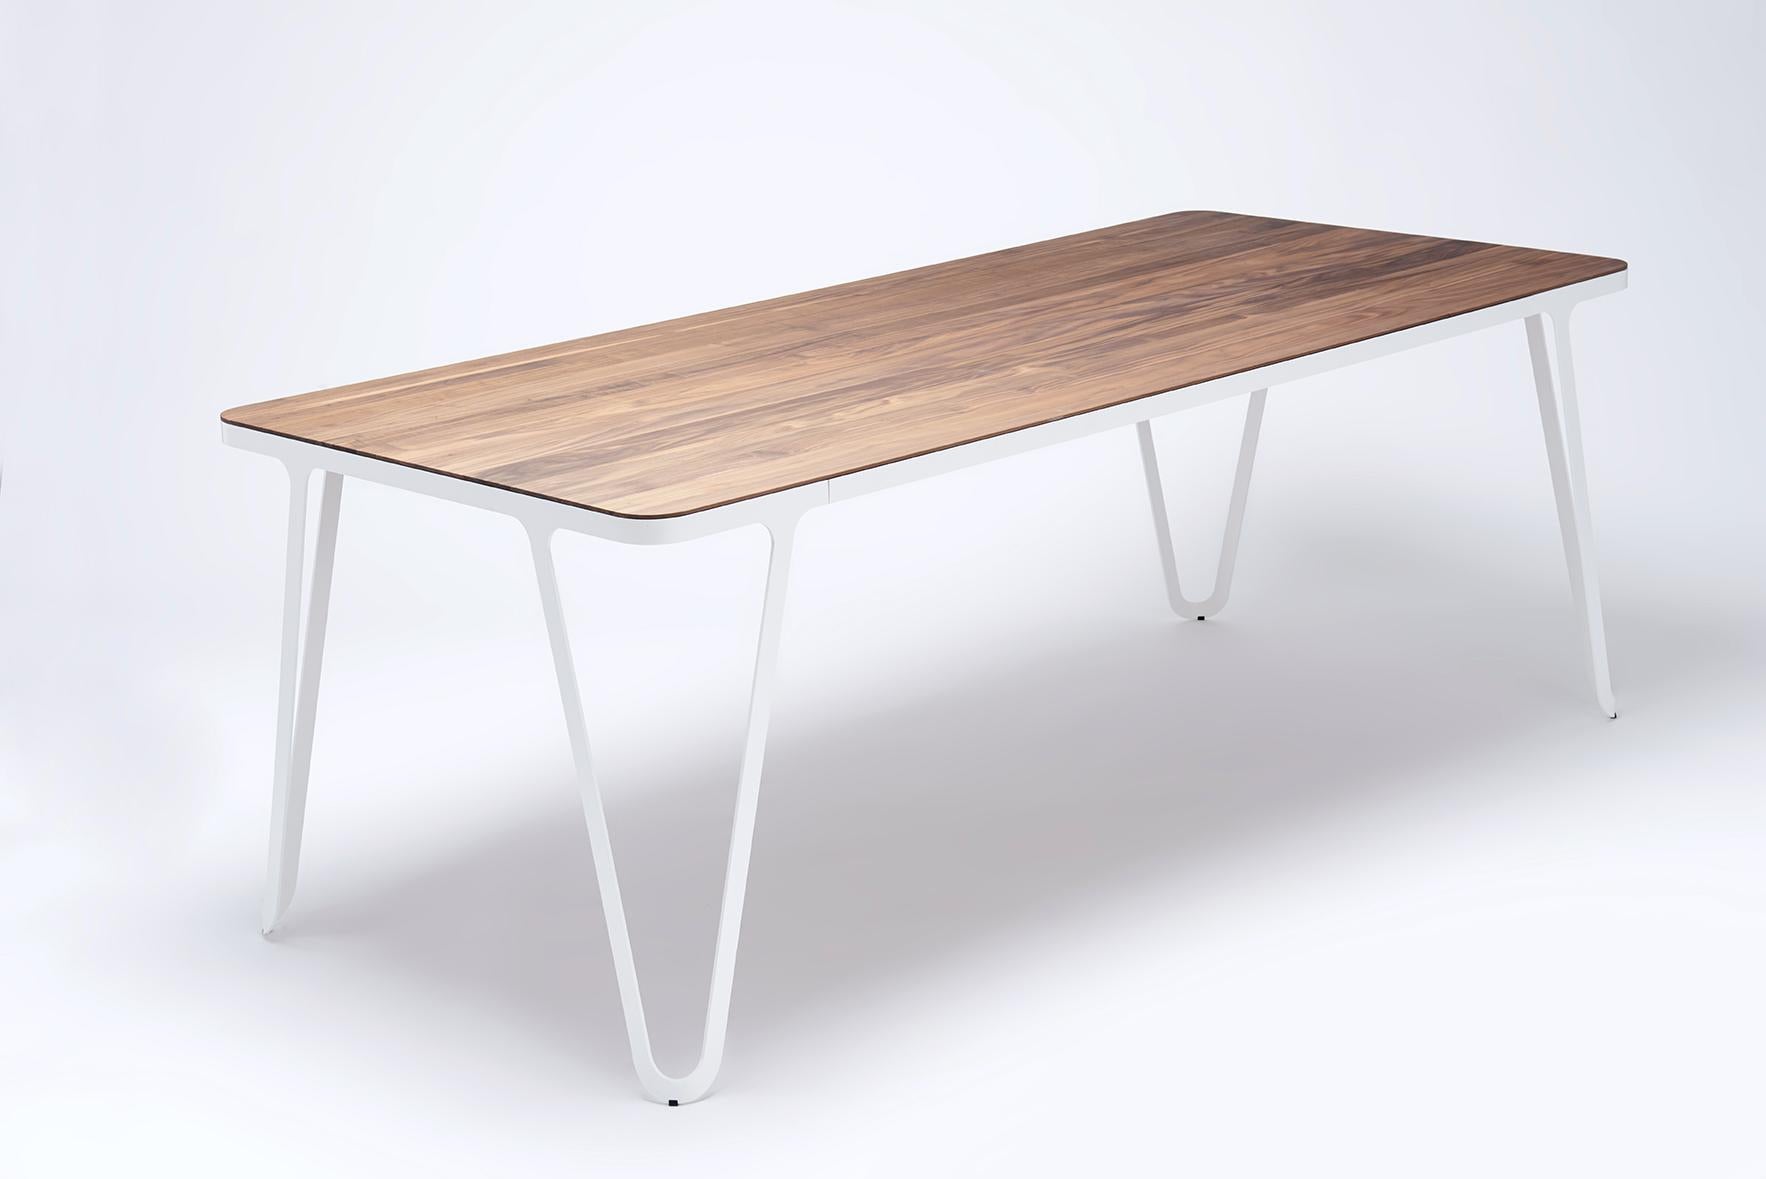 Loop table 200 Ash by Sebastian Scherer.
Dimensions: D200 x W90 x H74 cm.
Materials: Ash, Aluminium, Wood.
Weight: 57.8 kg.
Also Available: Colours:Solid wood (matt lacquered or oiled): black and white stained ash / natural oak / american